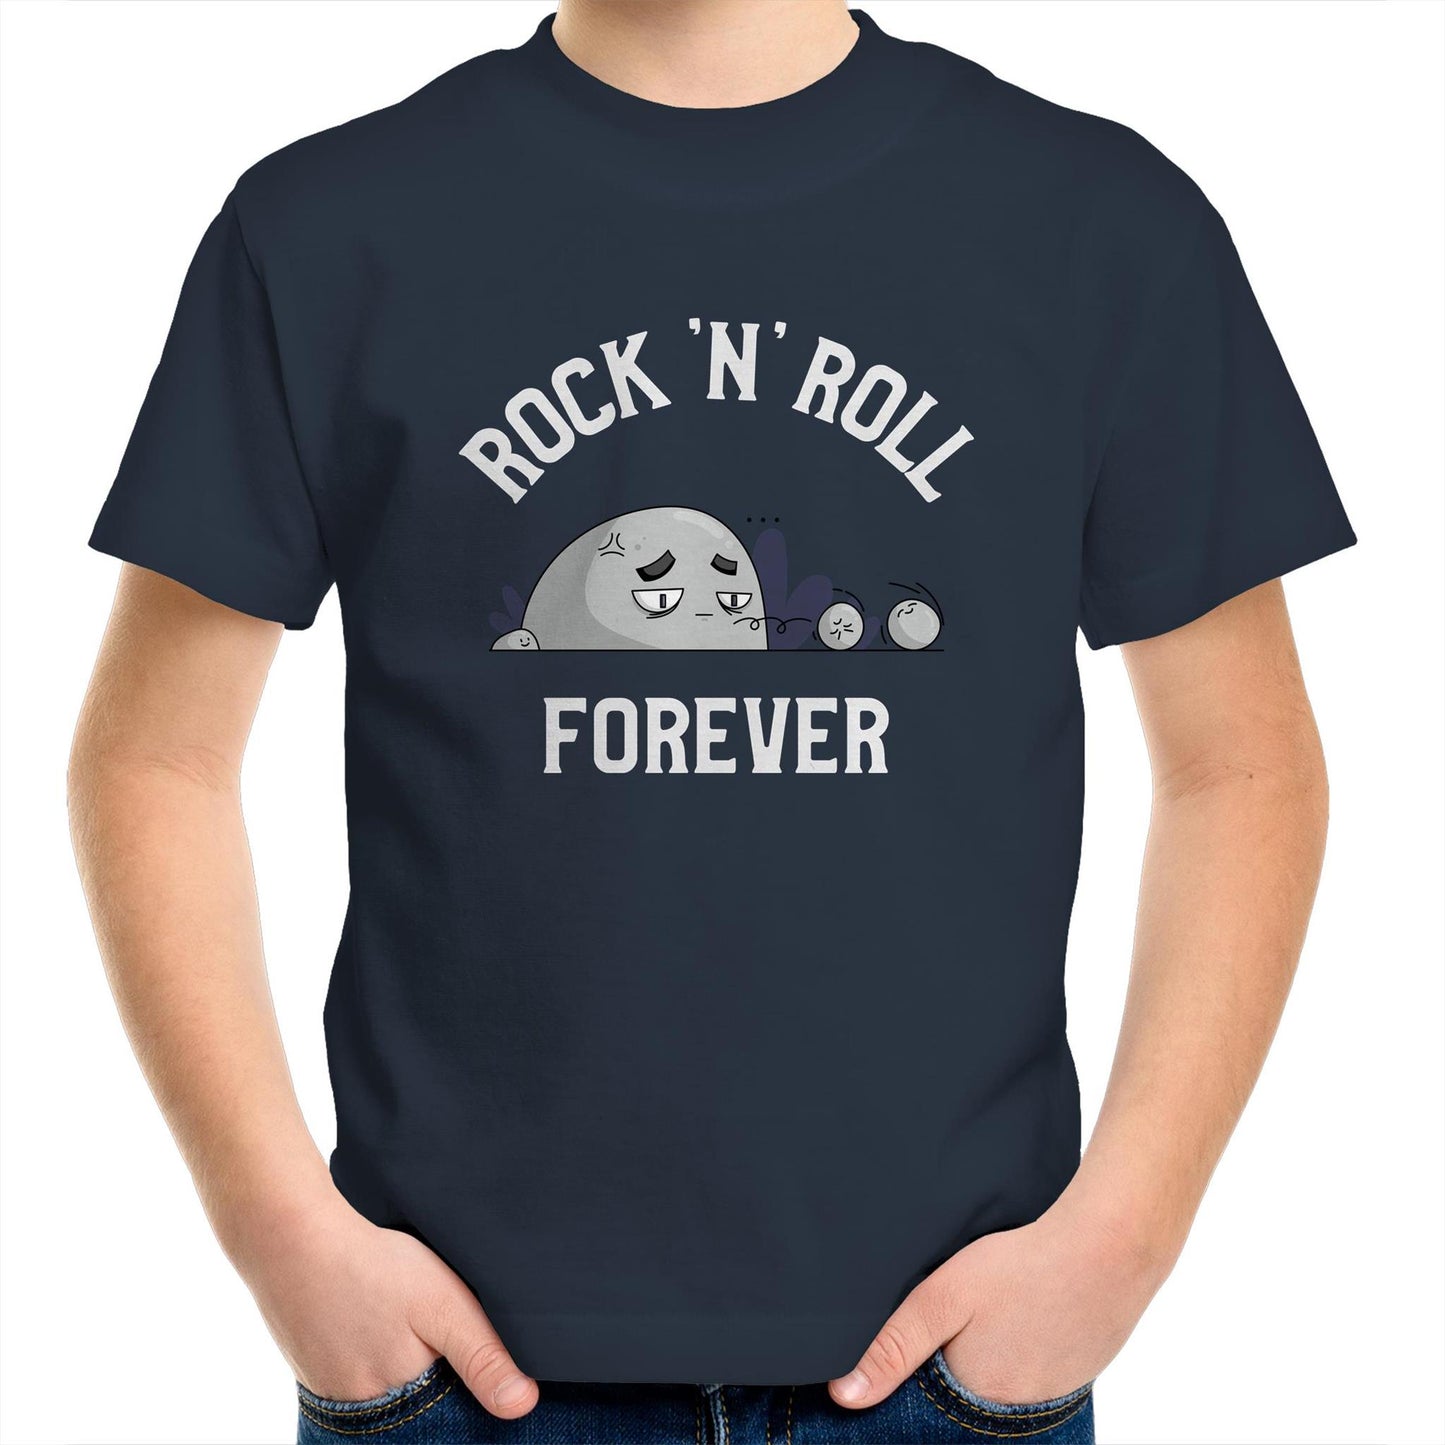 Rock 'N' Roll Forever - Kids Youth T-Shirt Navy Kids Youth T-shirt Music